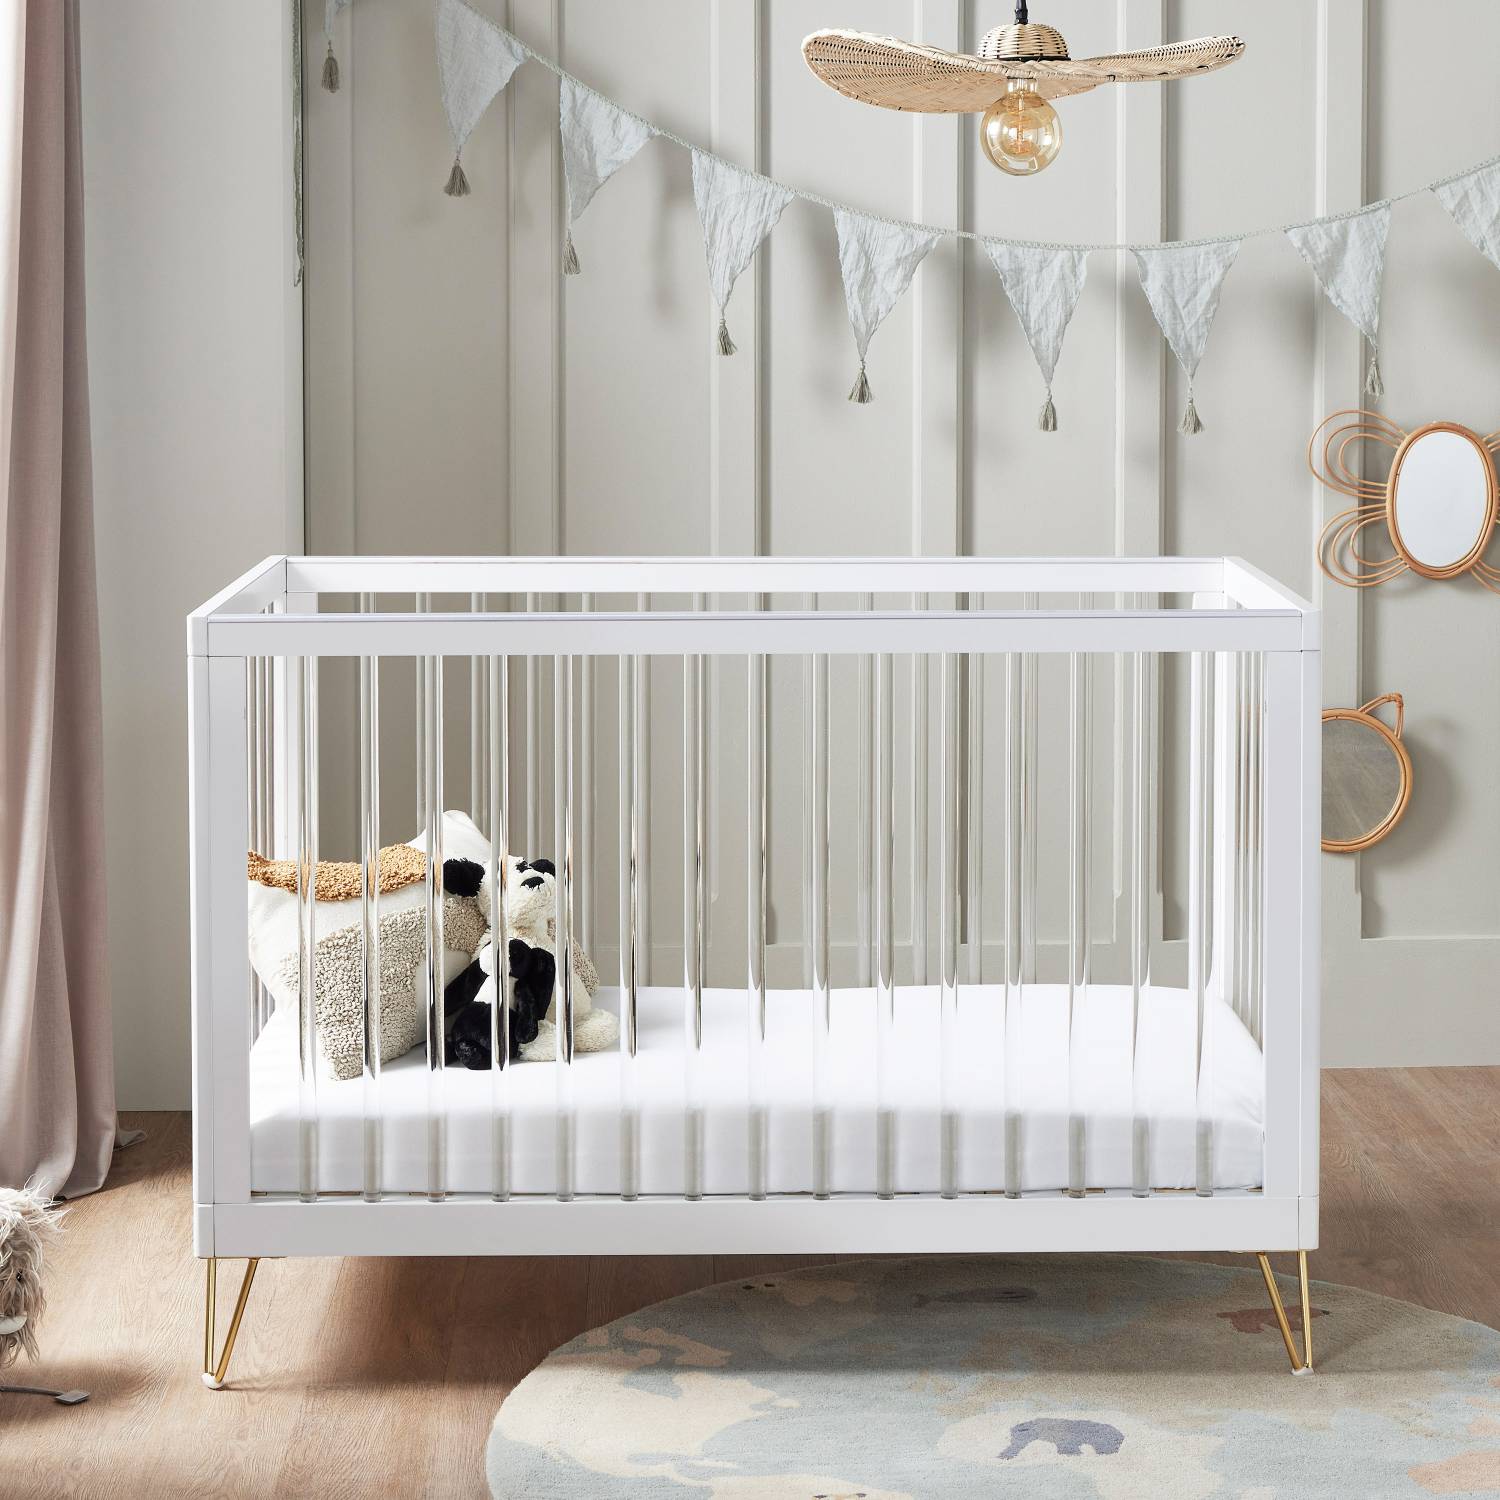 Acrylic Baby Cot Bed